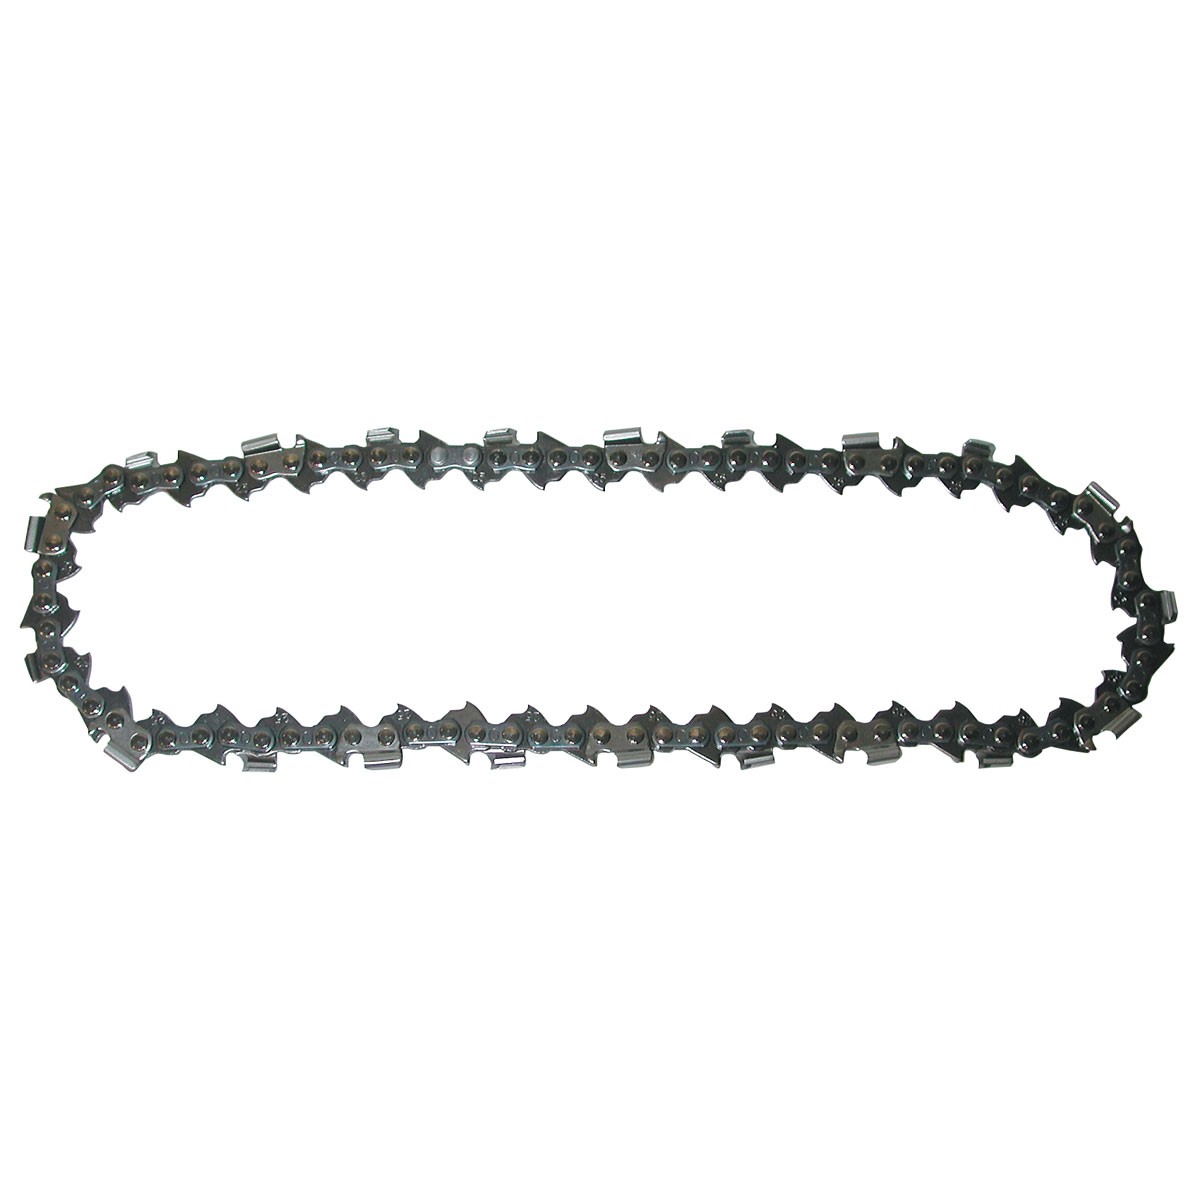 12" Replacement Chain